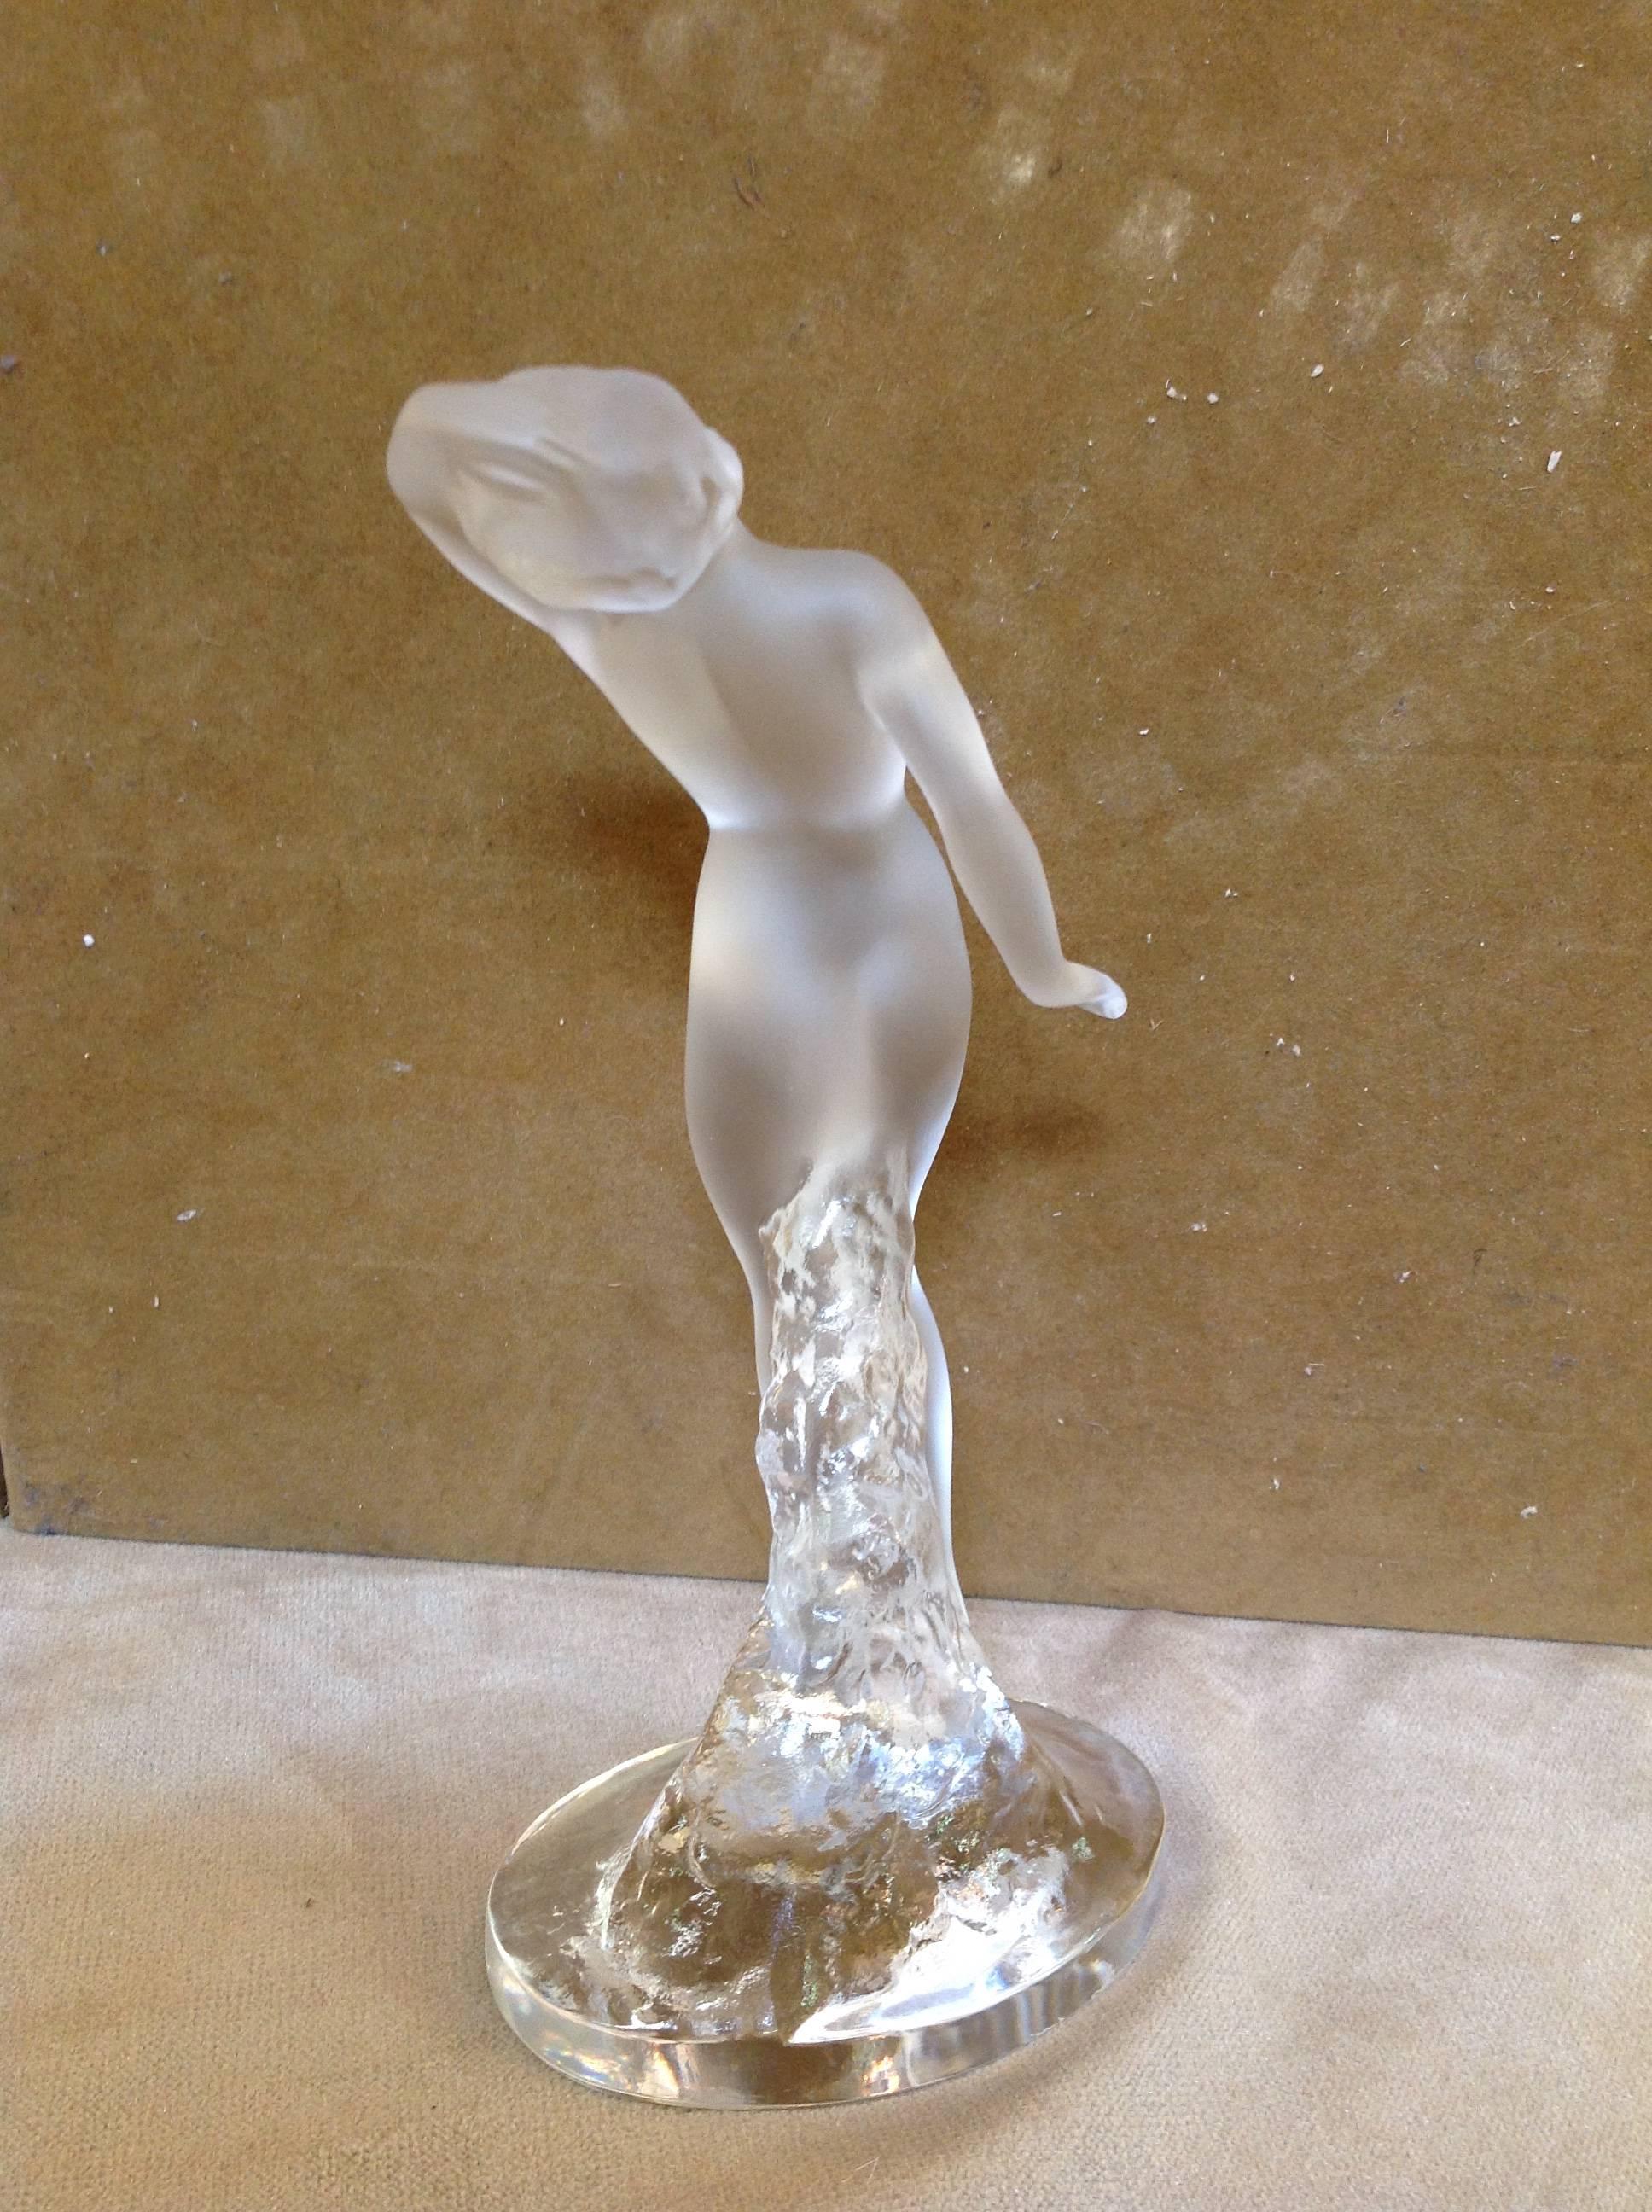 Lalique sculpture of a nude woman "Danseuse Bras Baisse" is very unique and a lovely addition to any collection.